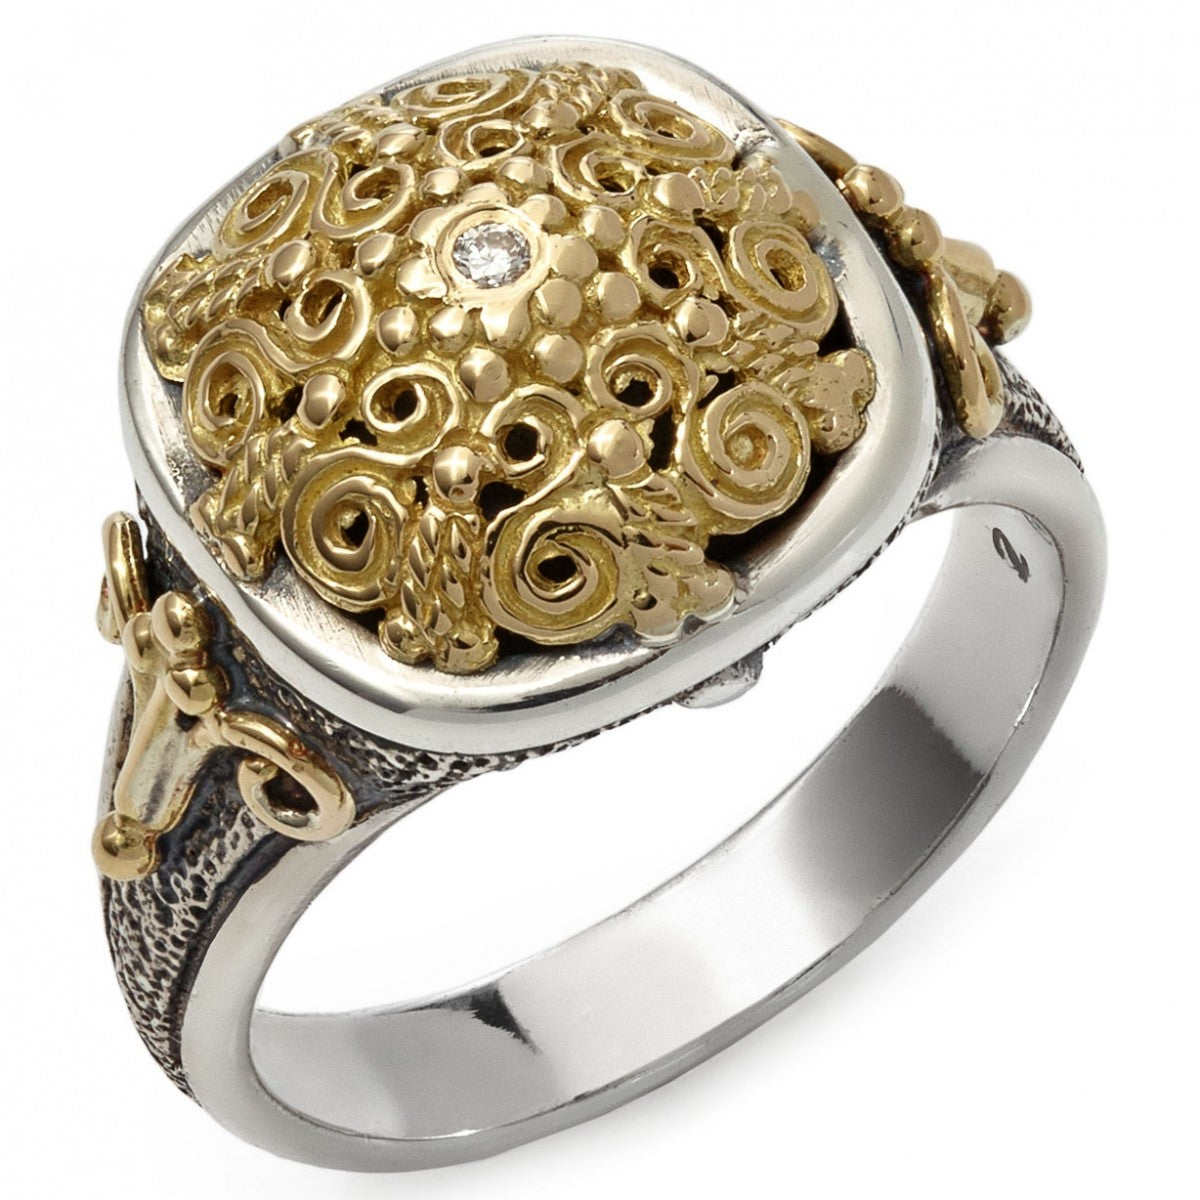 Konstantino Women's Diamond Collection Sterling Silver and 18K Gold Filigree Diamond Ring